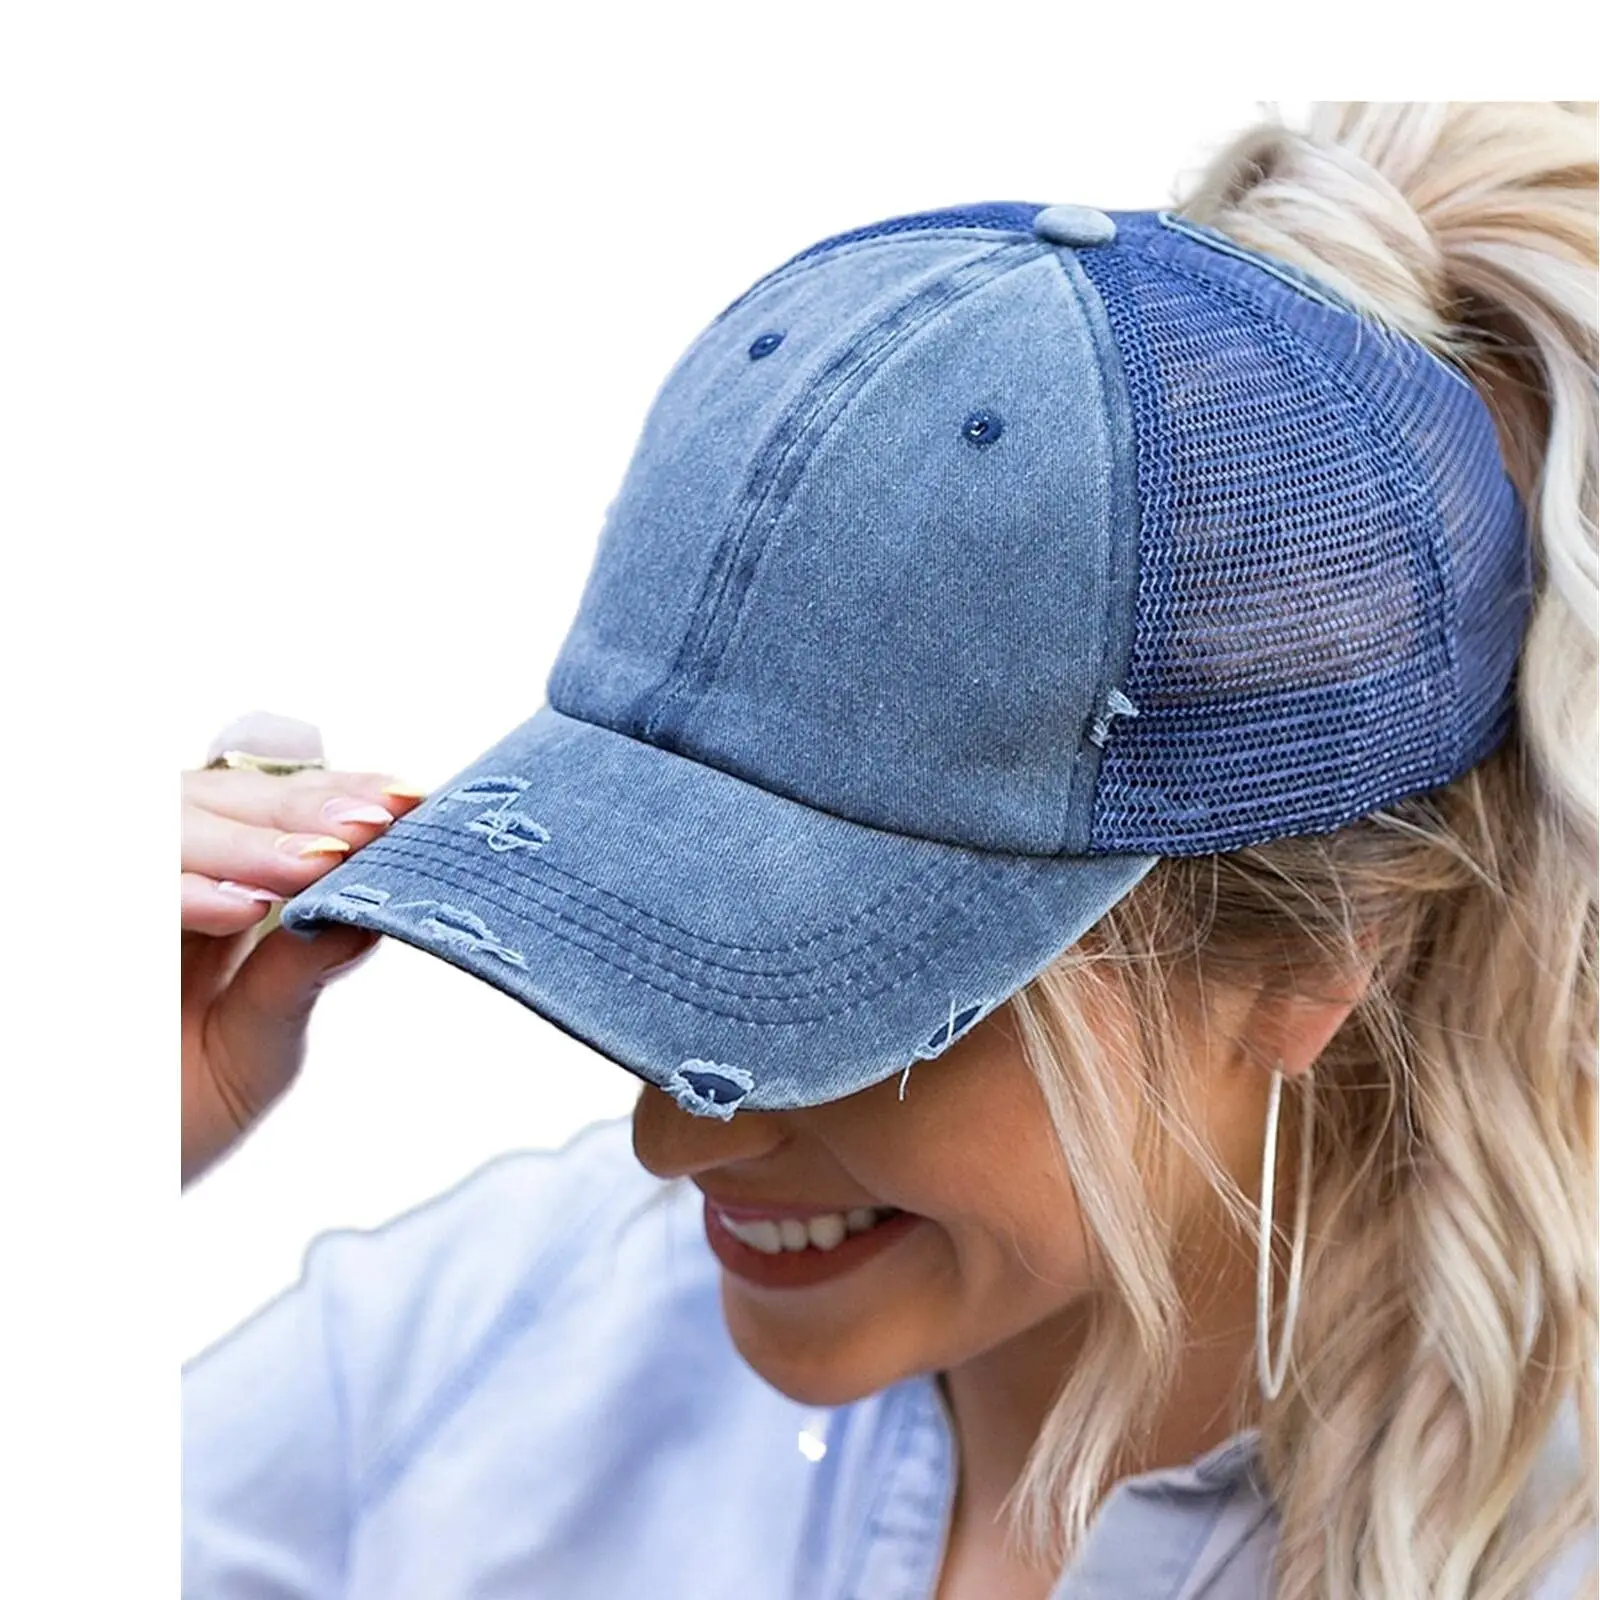 

2022 New Women Ponytail High Messy Bun Hat Distressed Baseball Caps Unconstructed Washed Dad Hats Girls Trucker Ponycaps